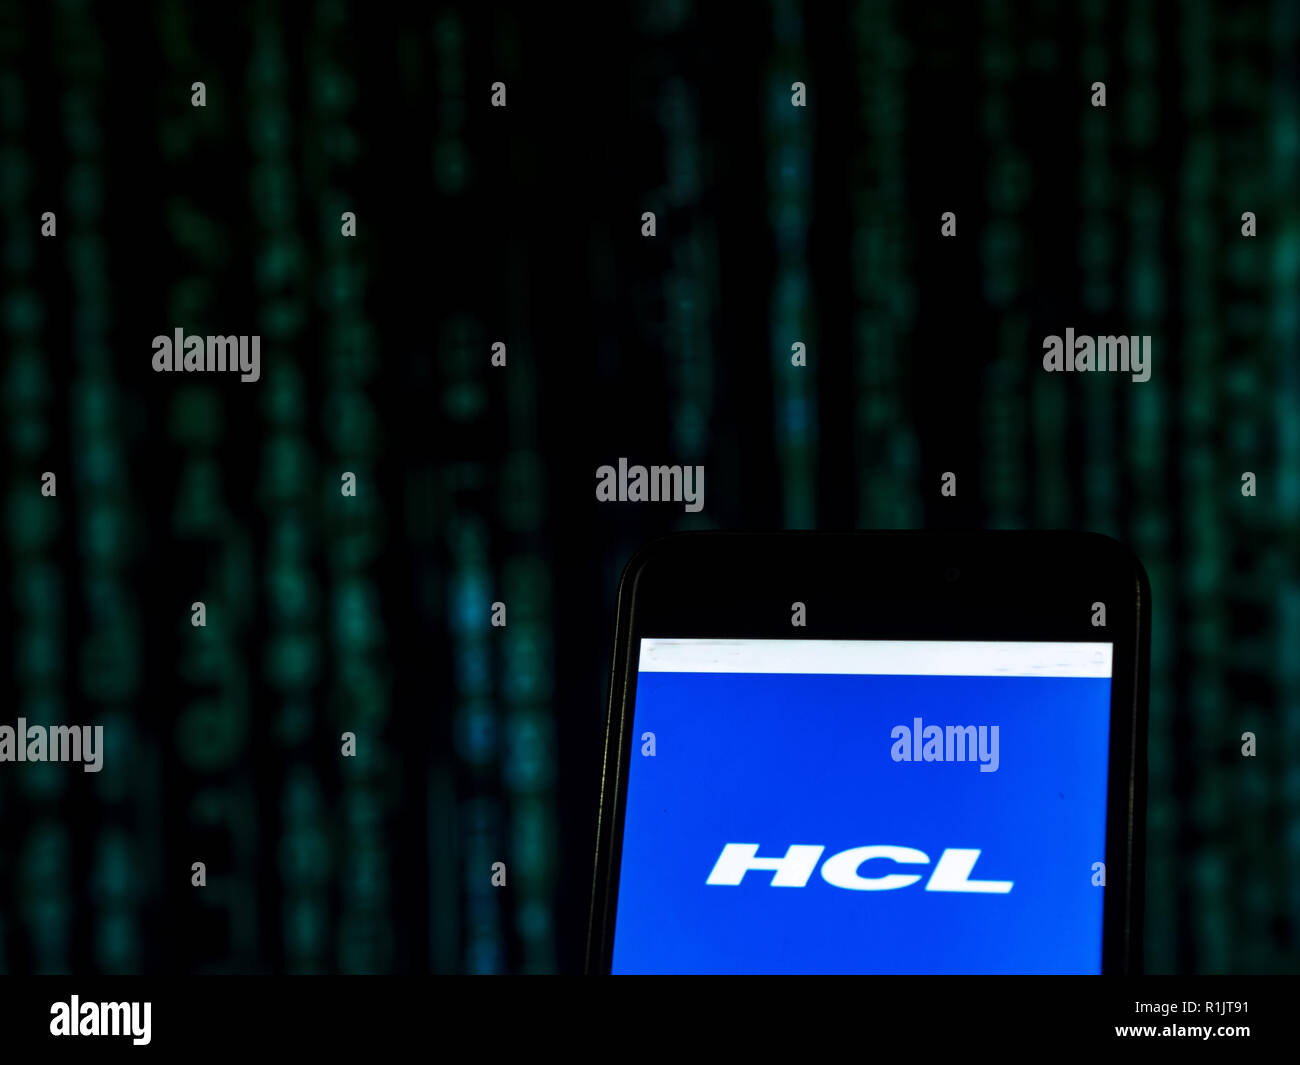 Kiev, Ukraine. 12th Nov, 2018. HCL Technologies Software company logo seen displayed on smart phone. HCL Technologies Limited is an Indian multinational technology company, head quartered in Noida, Uttar Pradesh, India. It is a subsidiary of HCL Enterprise. Originally a research and development division of HCL, it emerged as an independent company in 1991 when HCL ventured into the software services business. Credit: Igor Golovniov/SOPA Images/ZUMA Wire/Alamy Live News Stock Photo